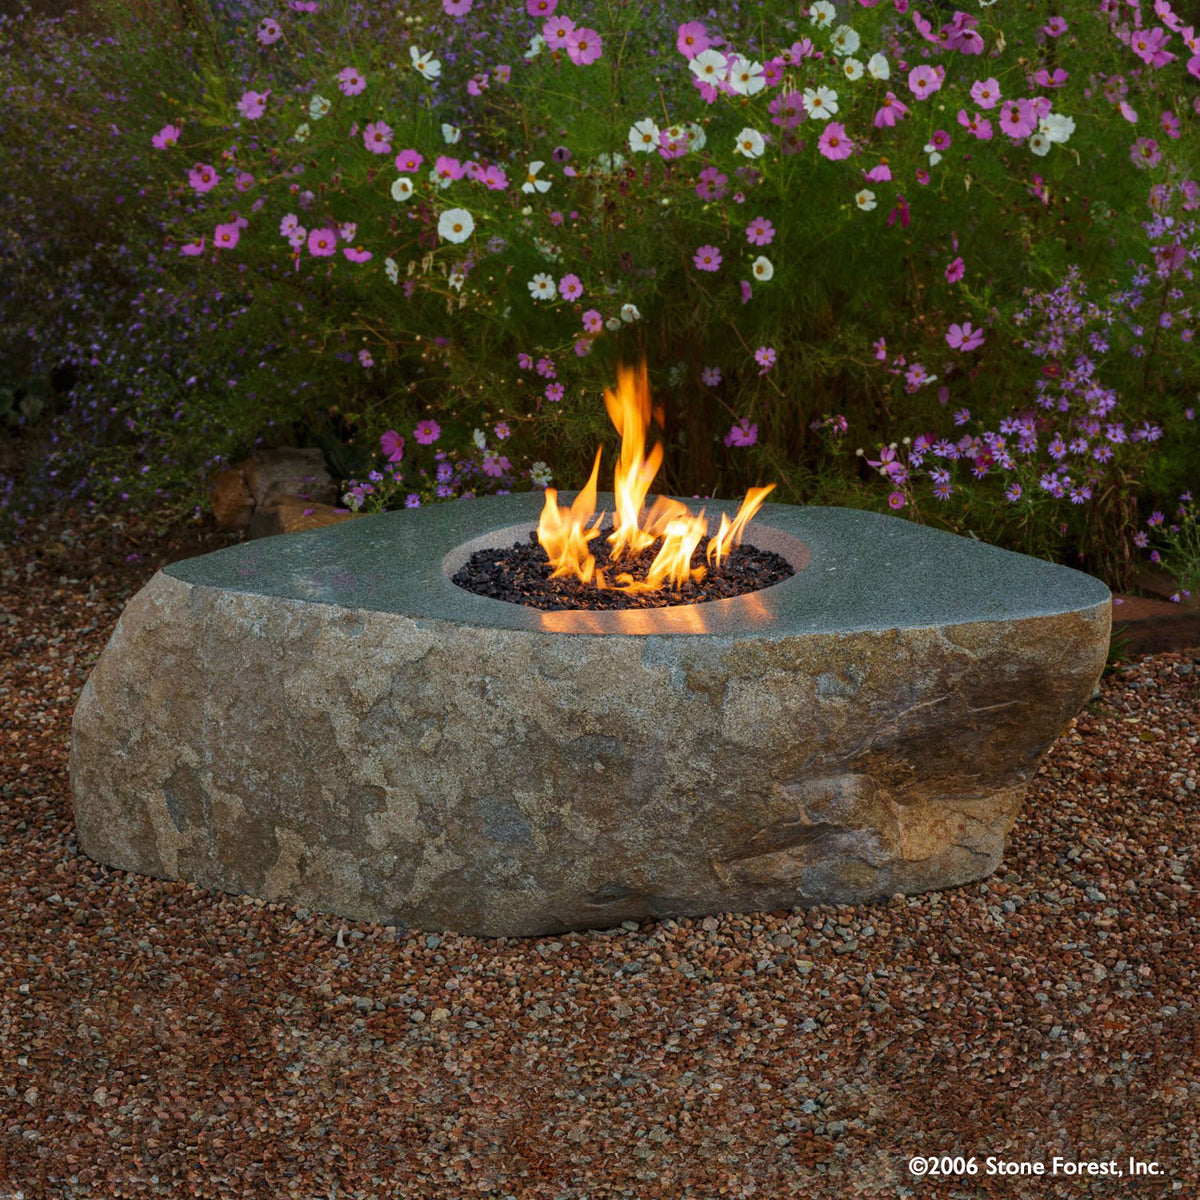 The Natural Fire Boulder is carved from a monolithic natural boulder image 1 of 2